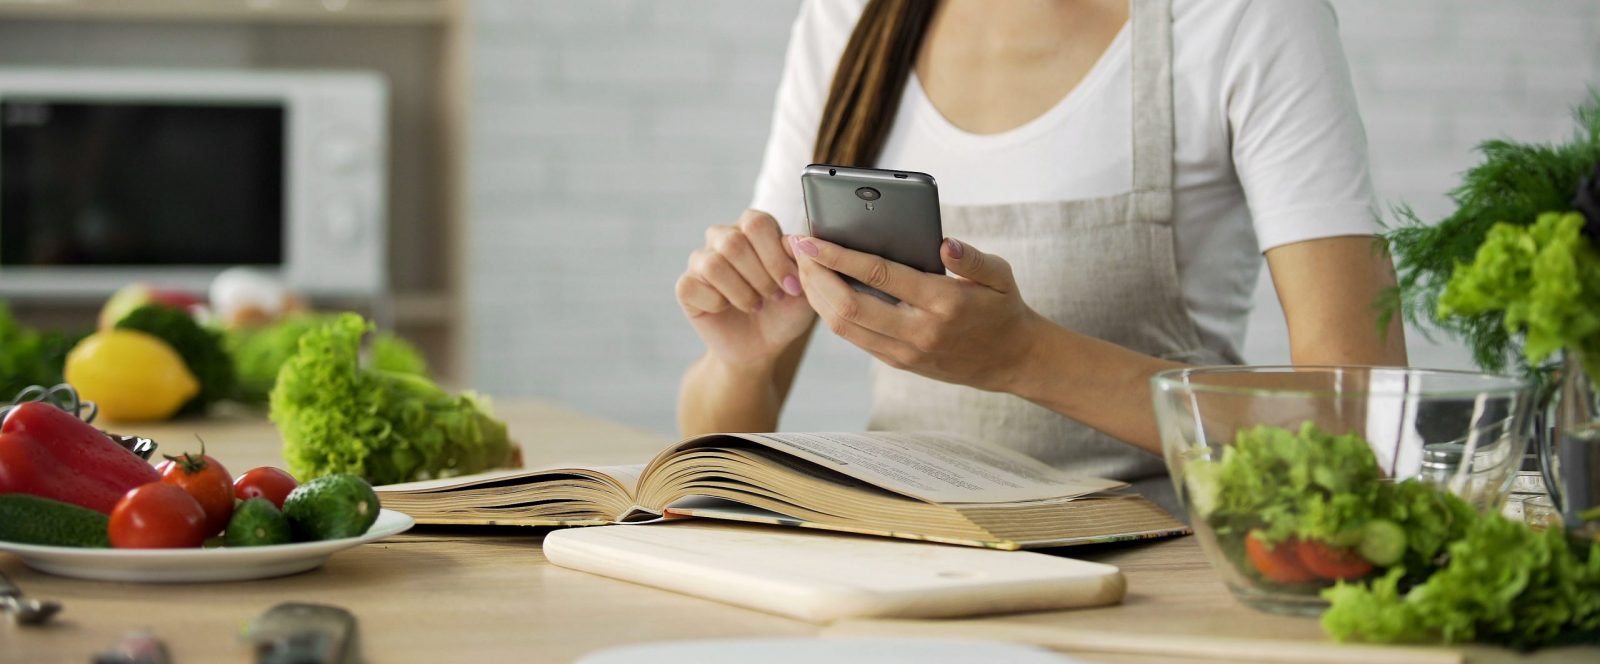 Woman learning on her phone and from a book in the kitchen / Photo Credit: Motortion Films / Shutterstock